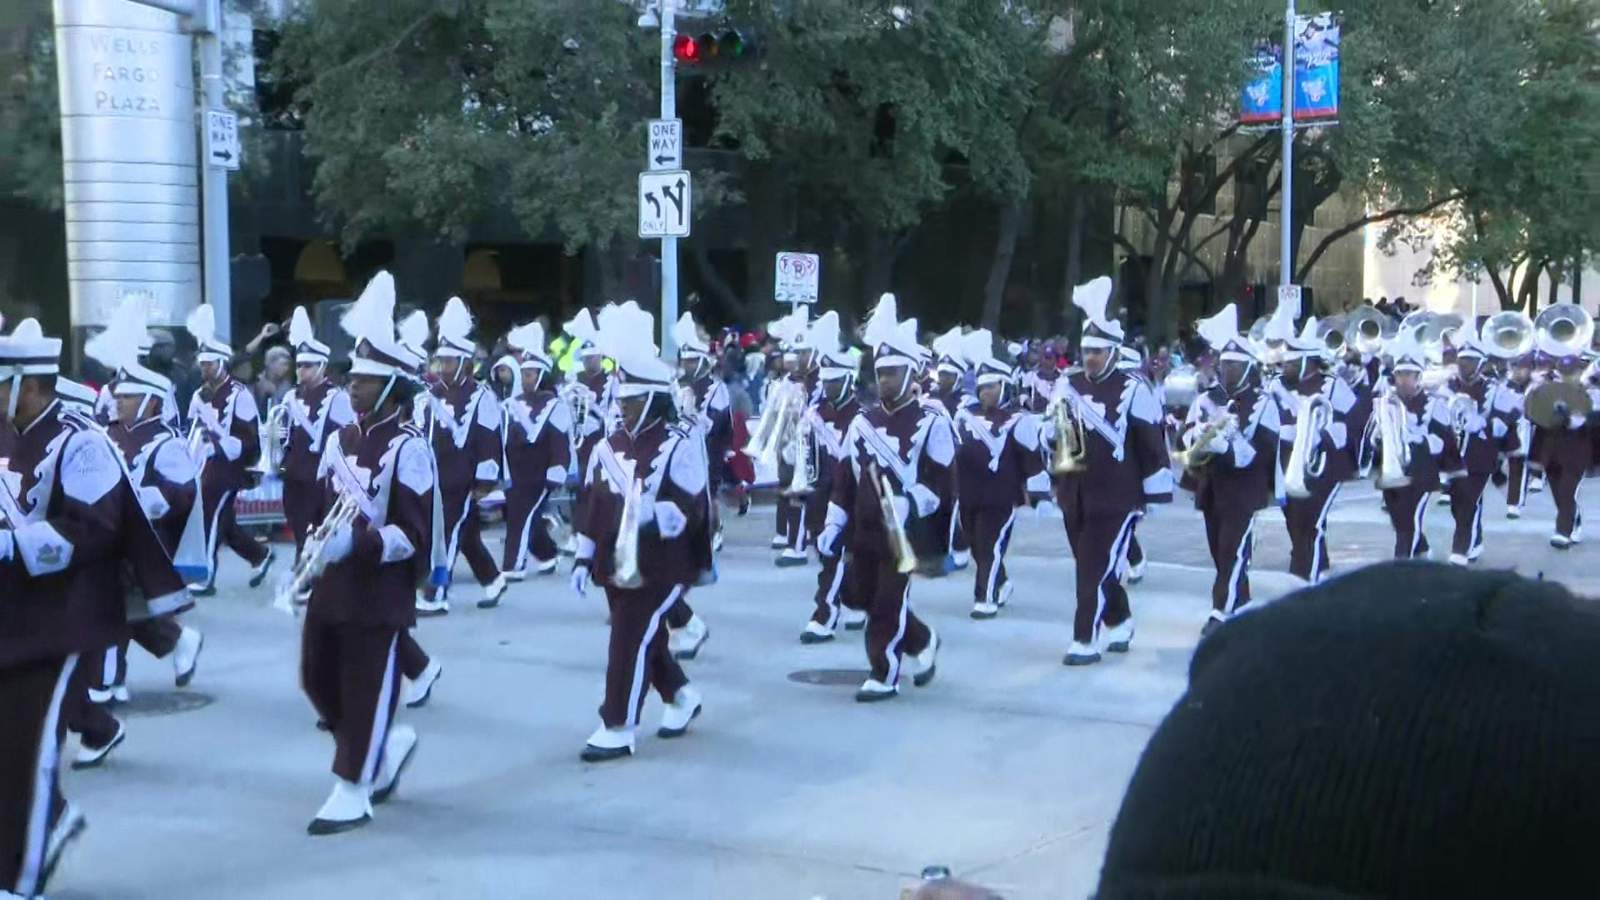 Houston’s annual parades celebrate Dr. Martin Luther King Jr.